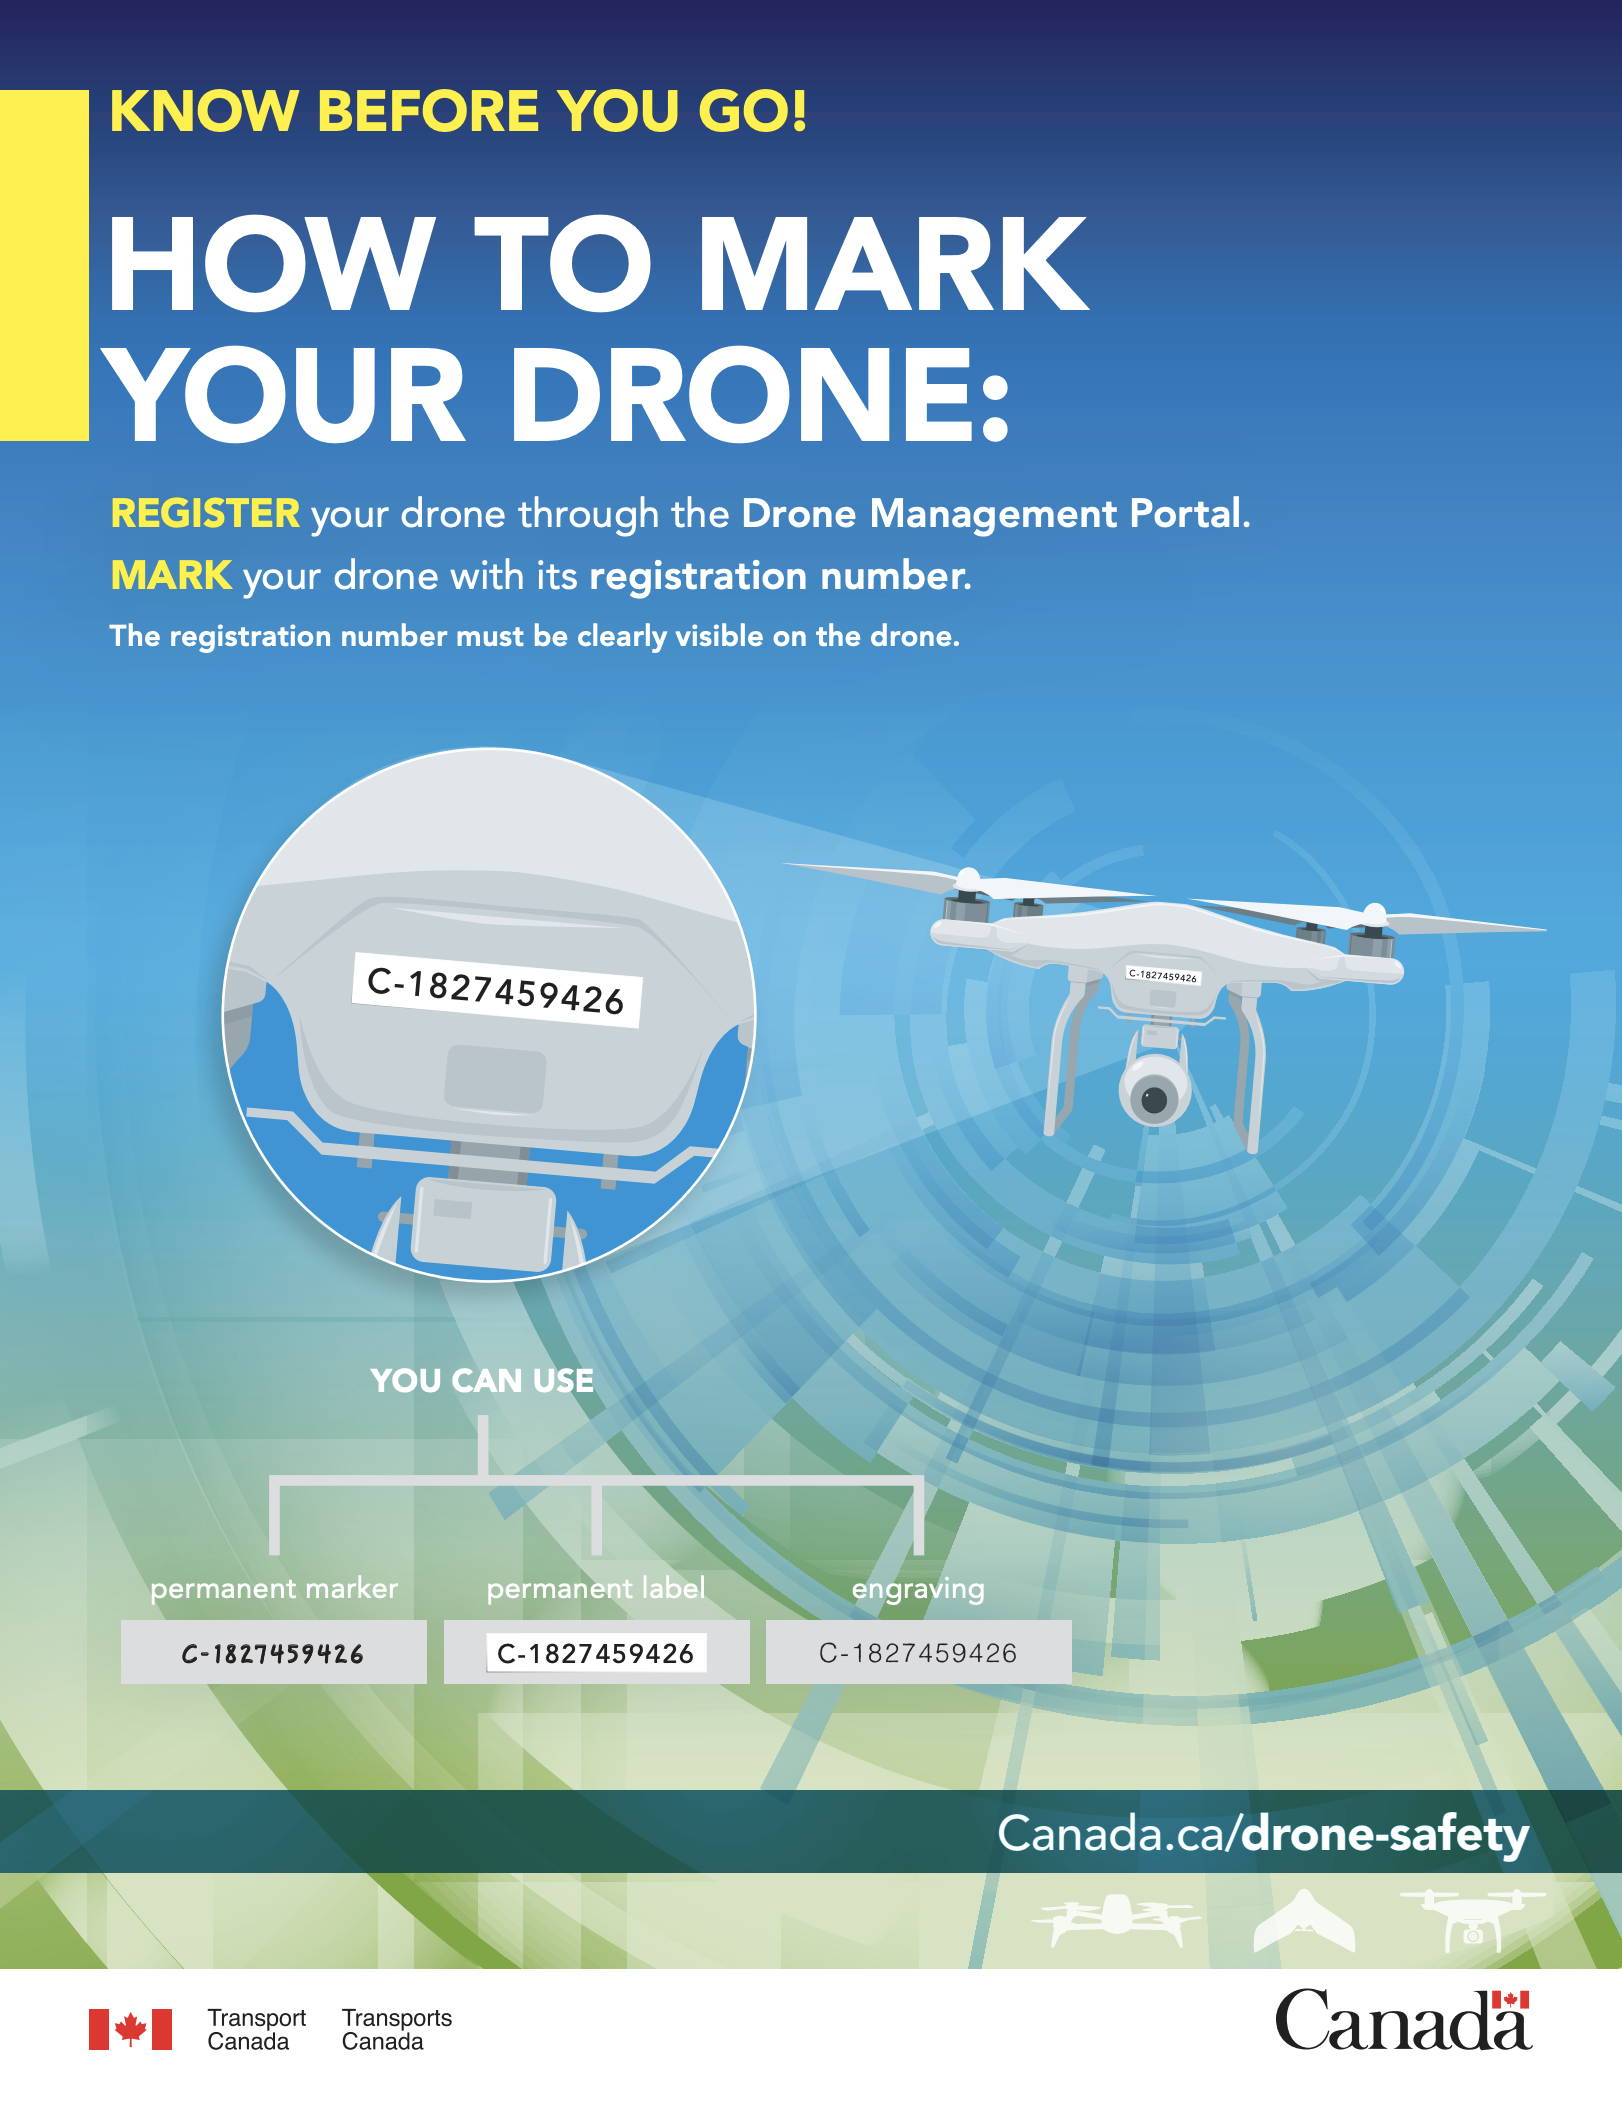 Transport Canada Drone Regulations Dr Drone how to mark your drone